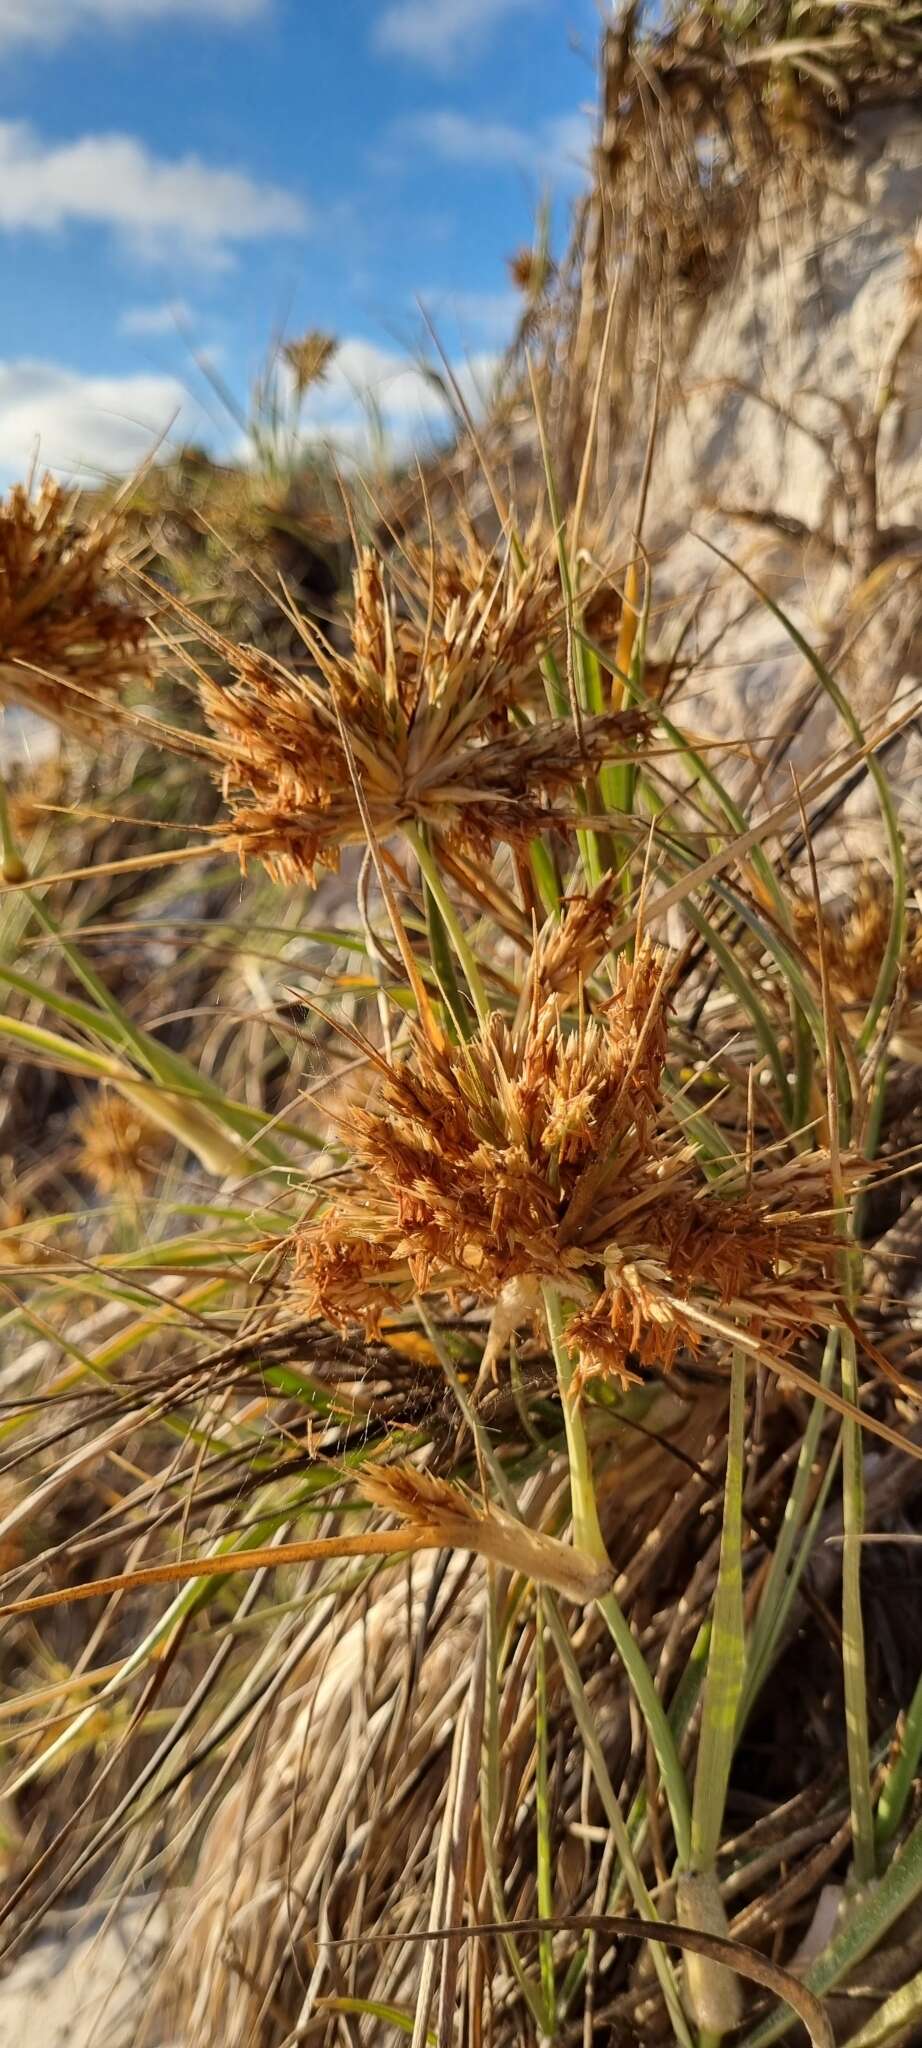 Image of hairy spinifex